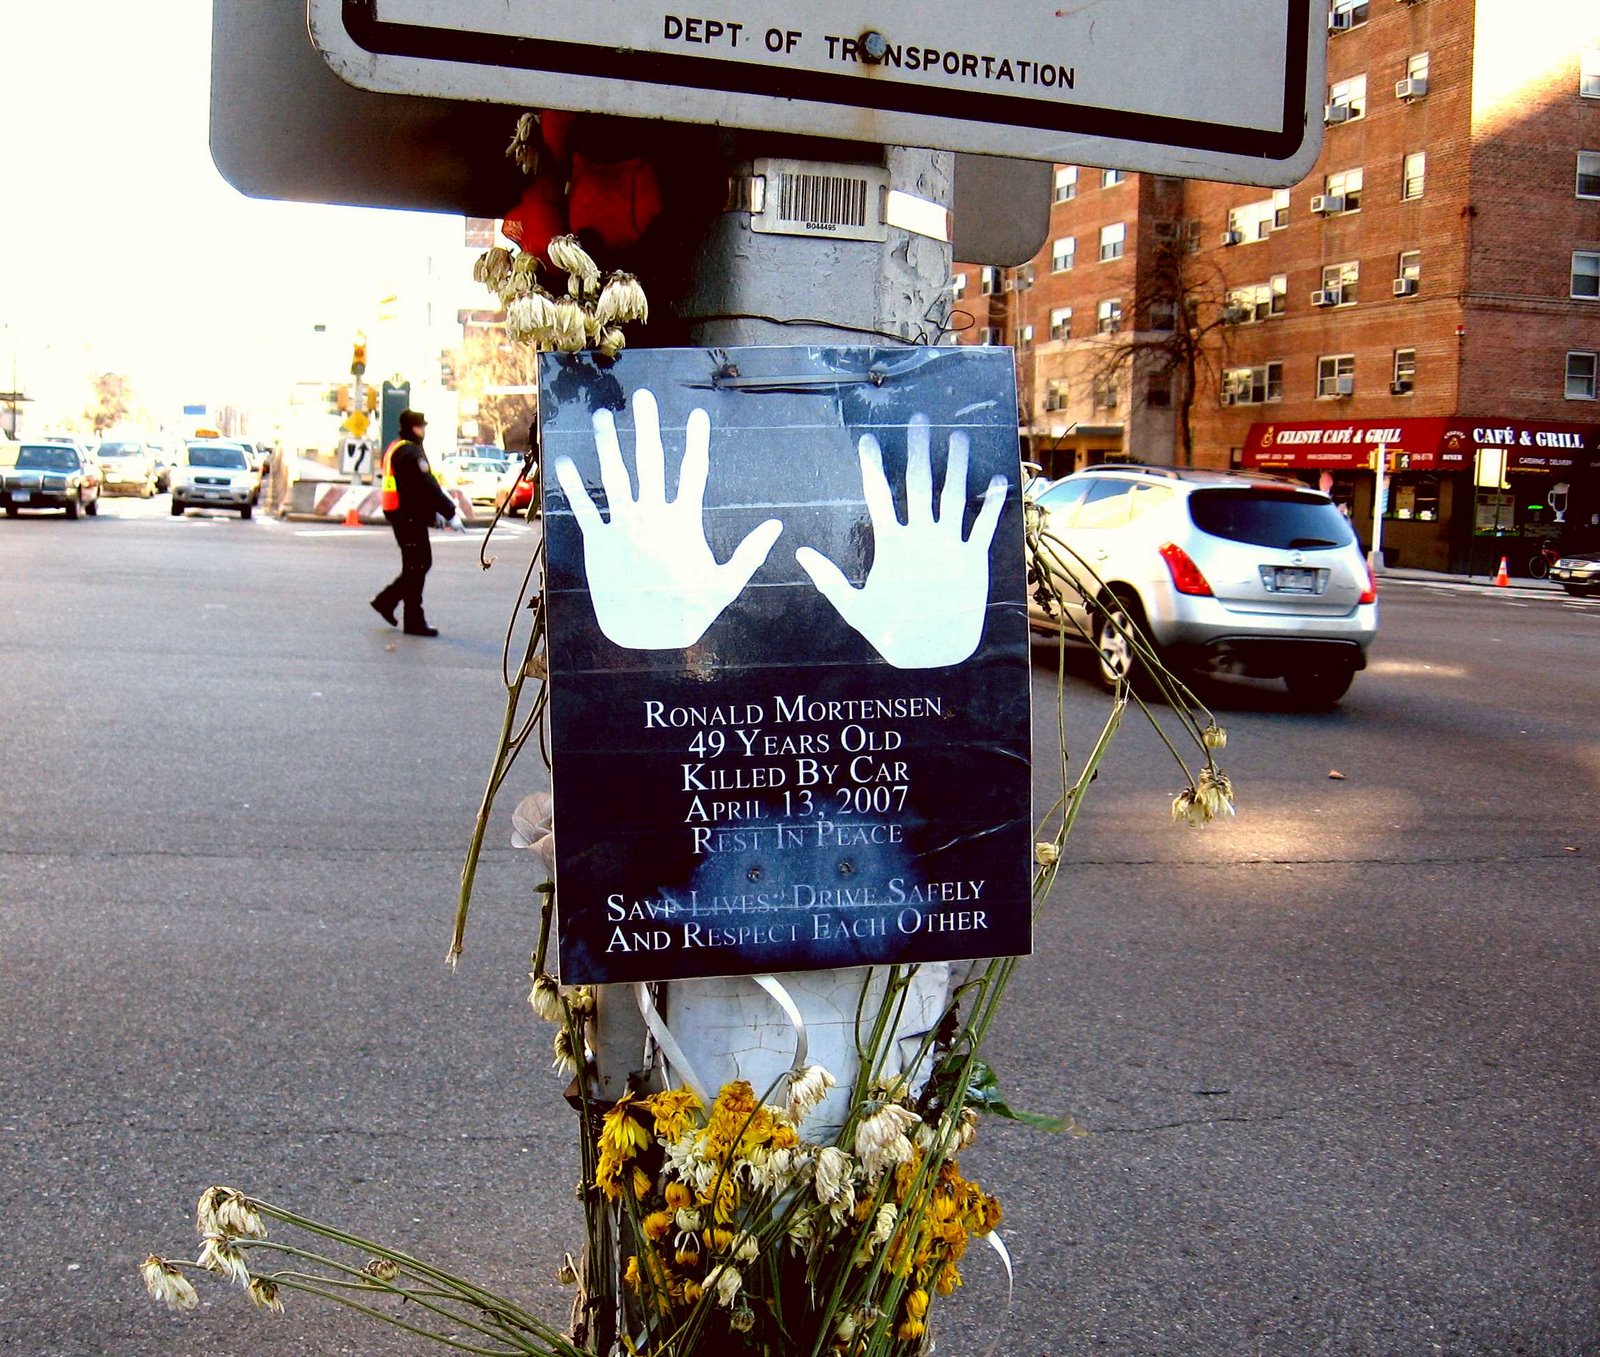 Plans to improve safety on Tillary Street have been in the works since 20004. Above: A sign was temporarily installed to honor the memory of teacher Ron Mortensen, run down by a car on Tillary and Adams Streets at the entrance to the Brooklyn Bridge in 2007. Mortensen tripped over his own shoes trying to run out of the way of a car. Photo by MK Frost, courtesy of McBrooklyn